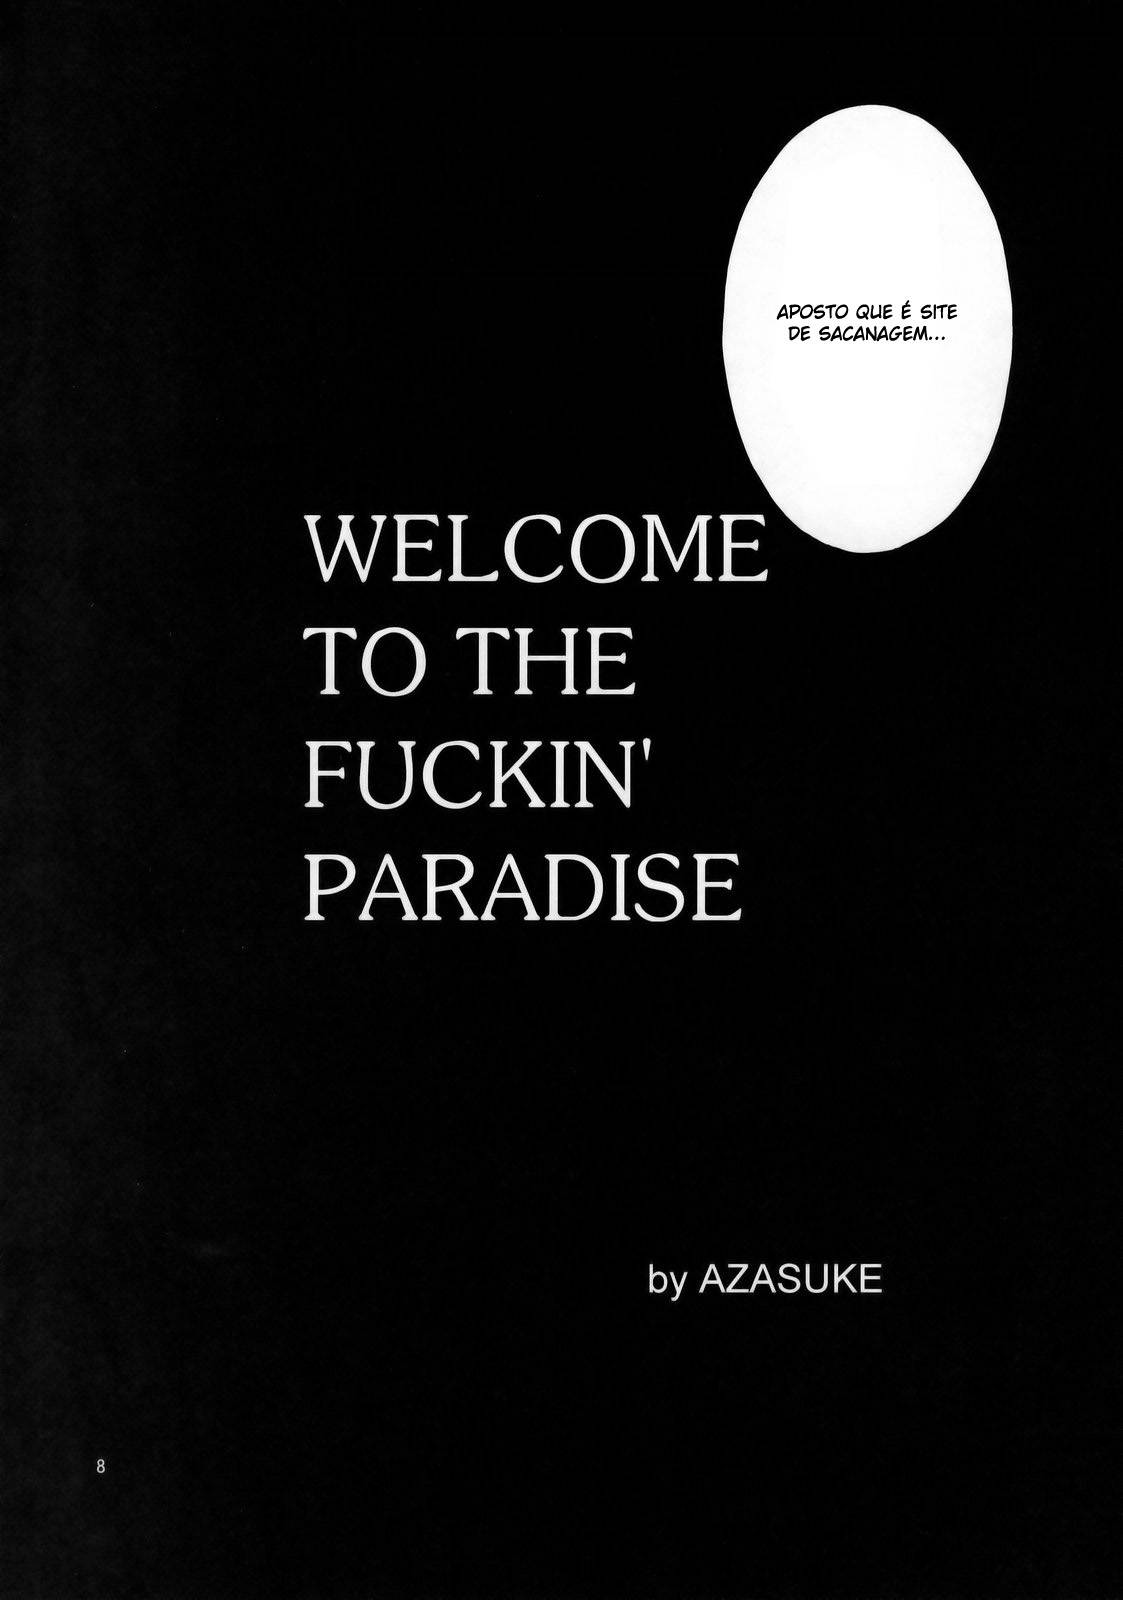 welcome-to-the-fuckin-paradise-5.jpg